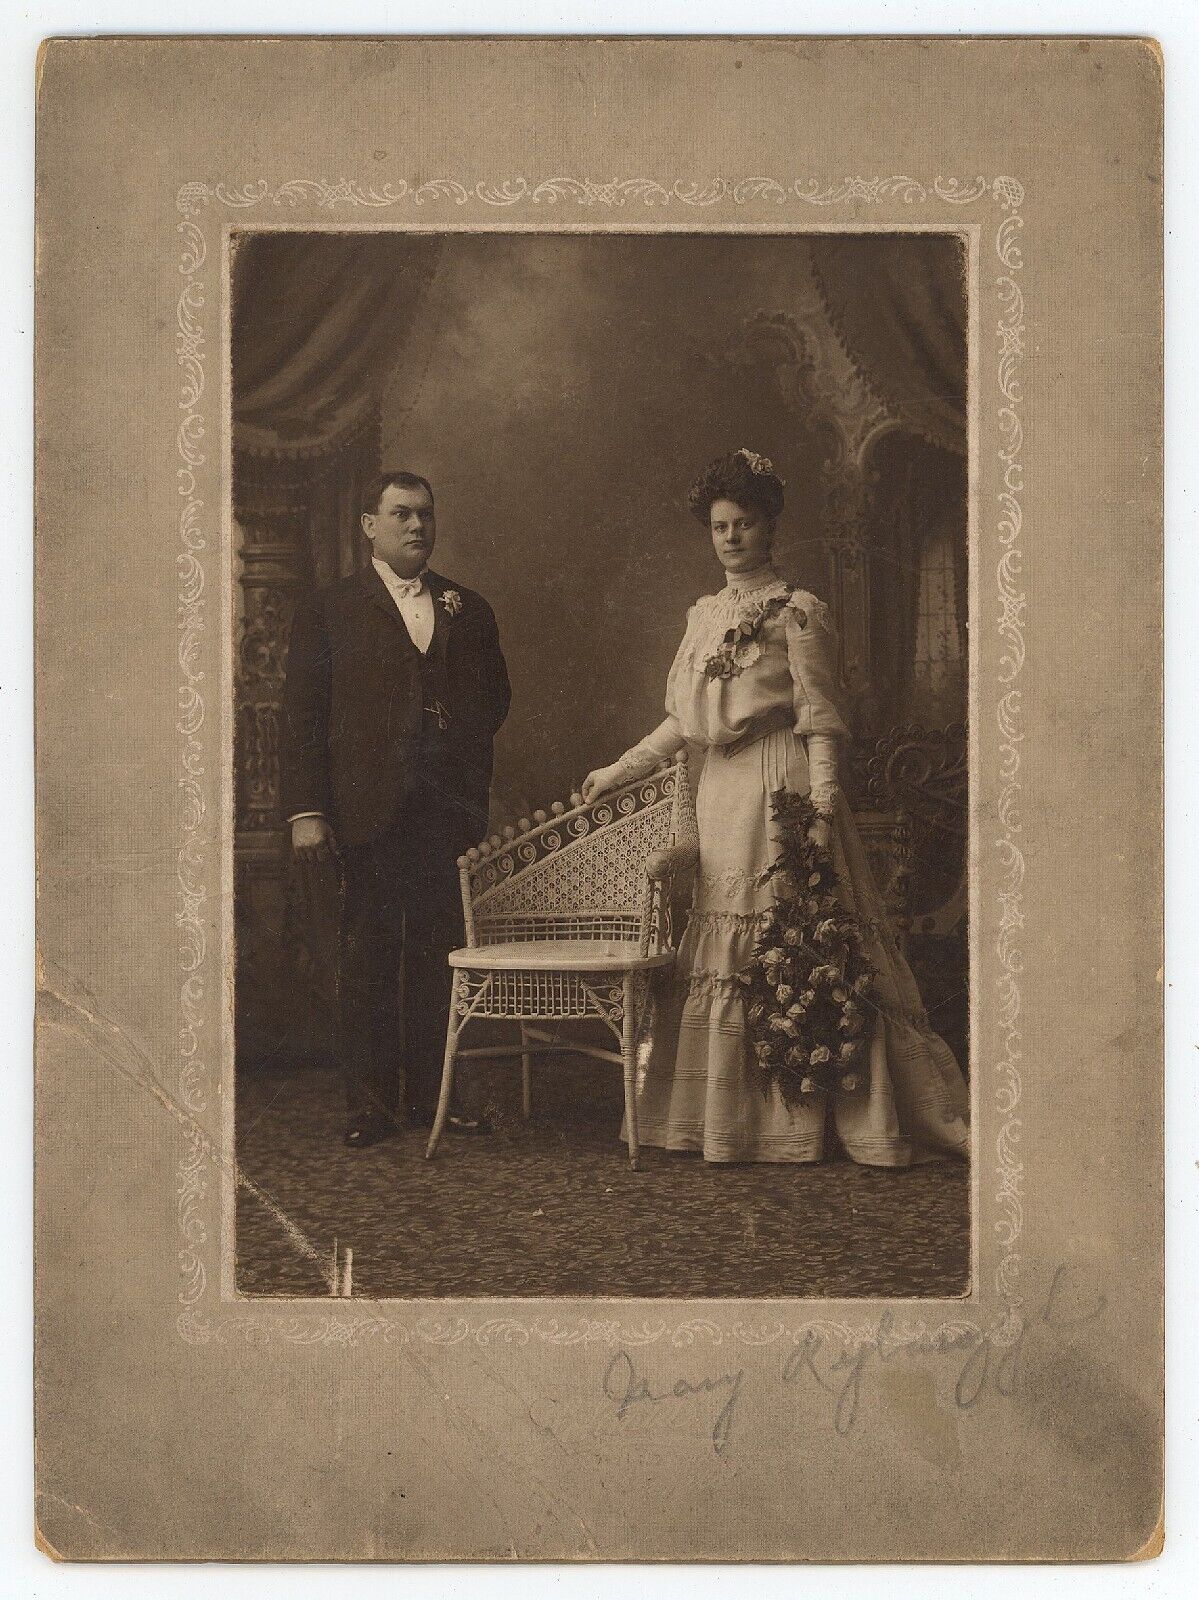 Antique c1900s Cabinet Card Wedding Couple Bride With Rose Bouquet Buffalo, NY